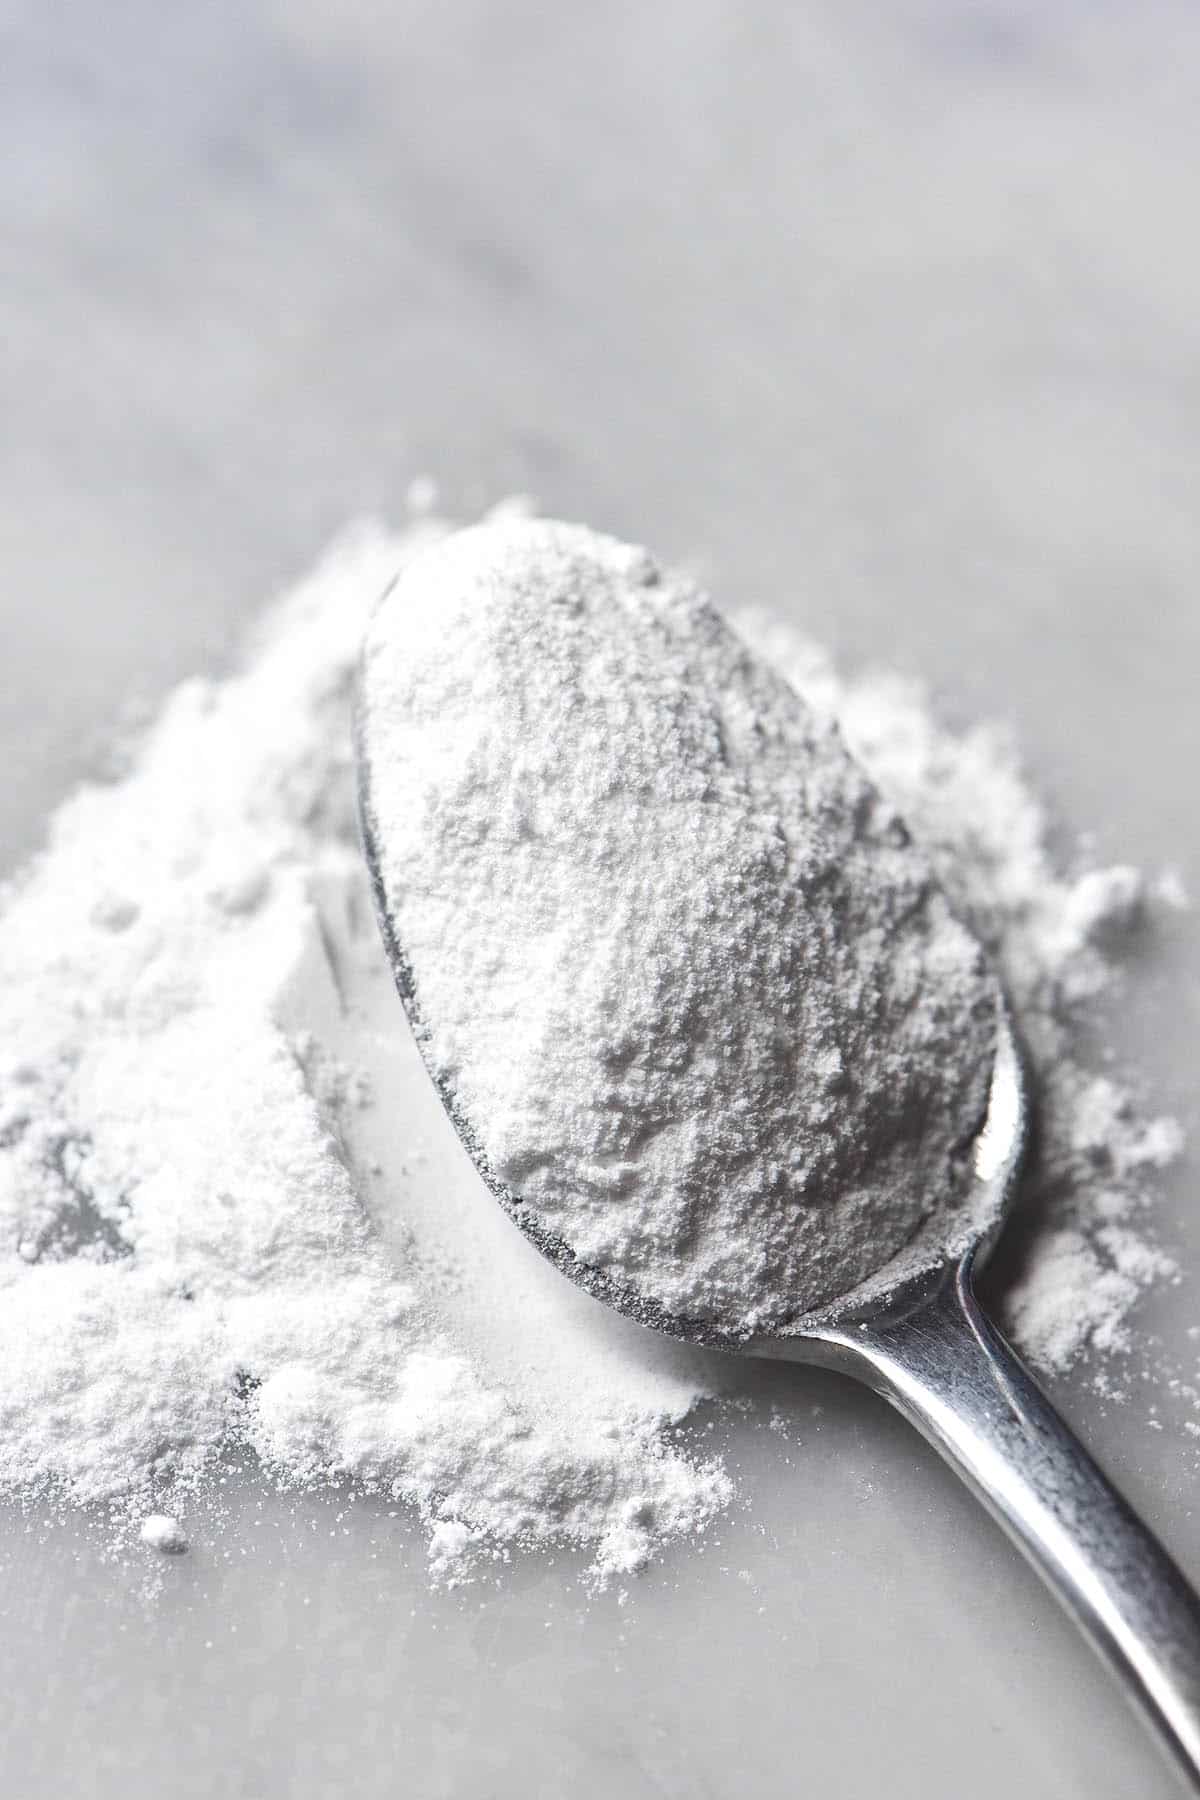 A macro image of a teaspoon filled with gluten free baking powder on a white marble table